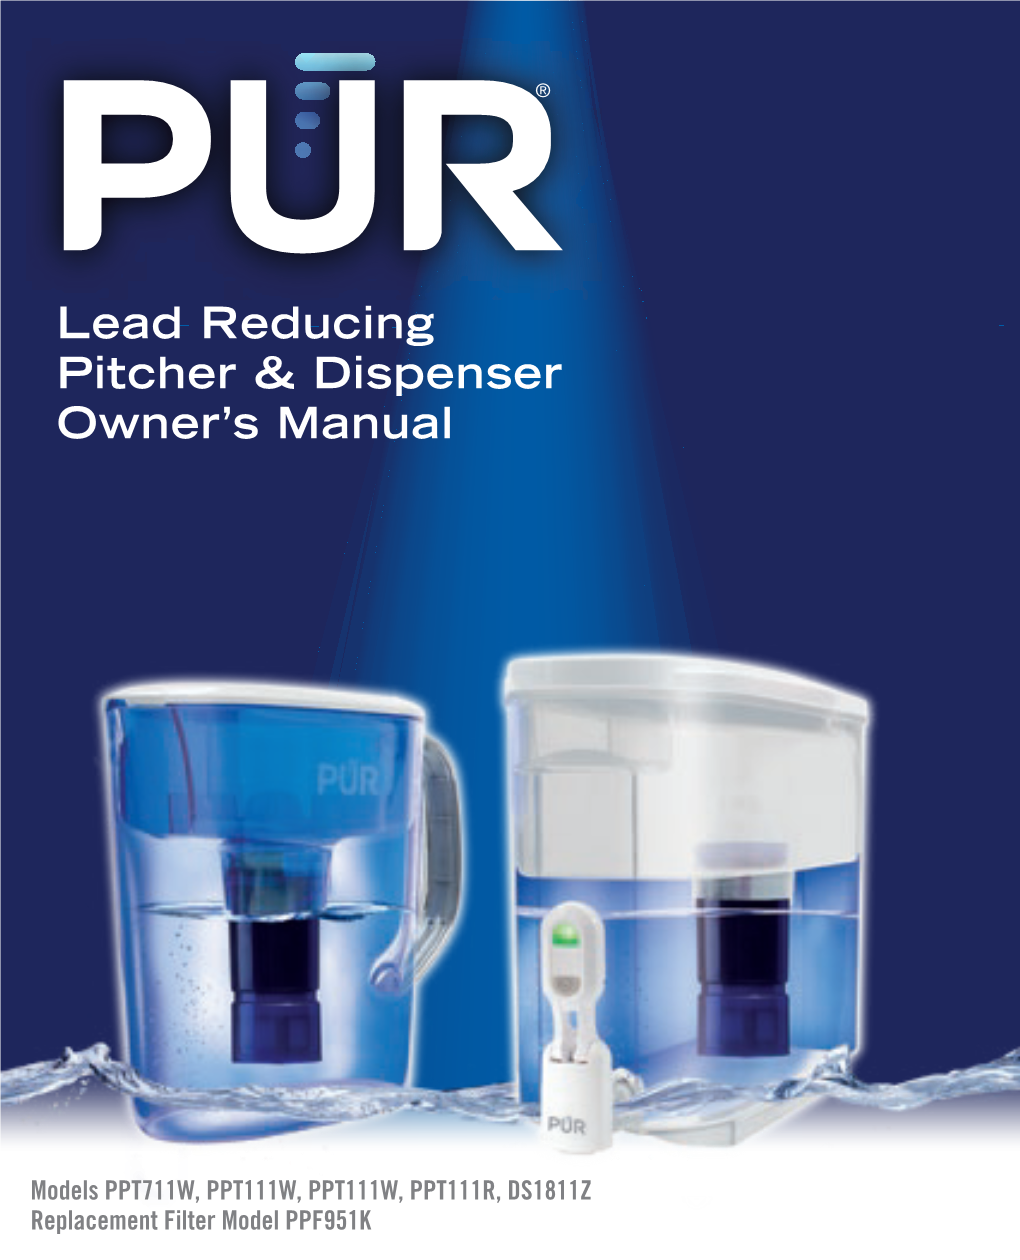 Lead Reducing Pitcher & Dispenser Owner's Manual